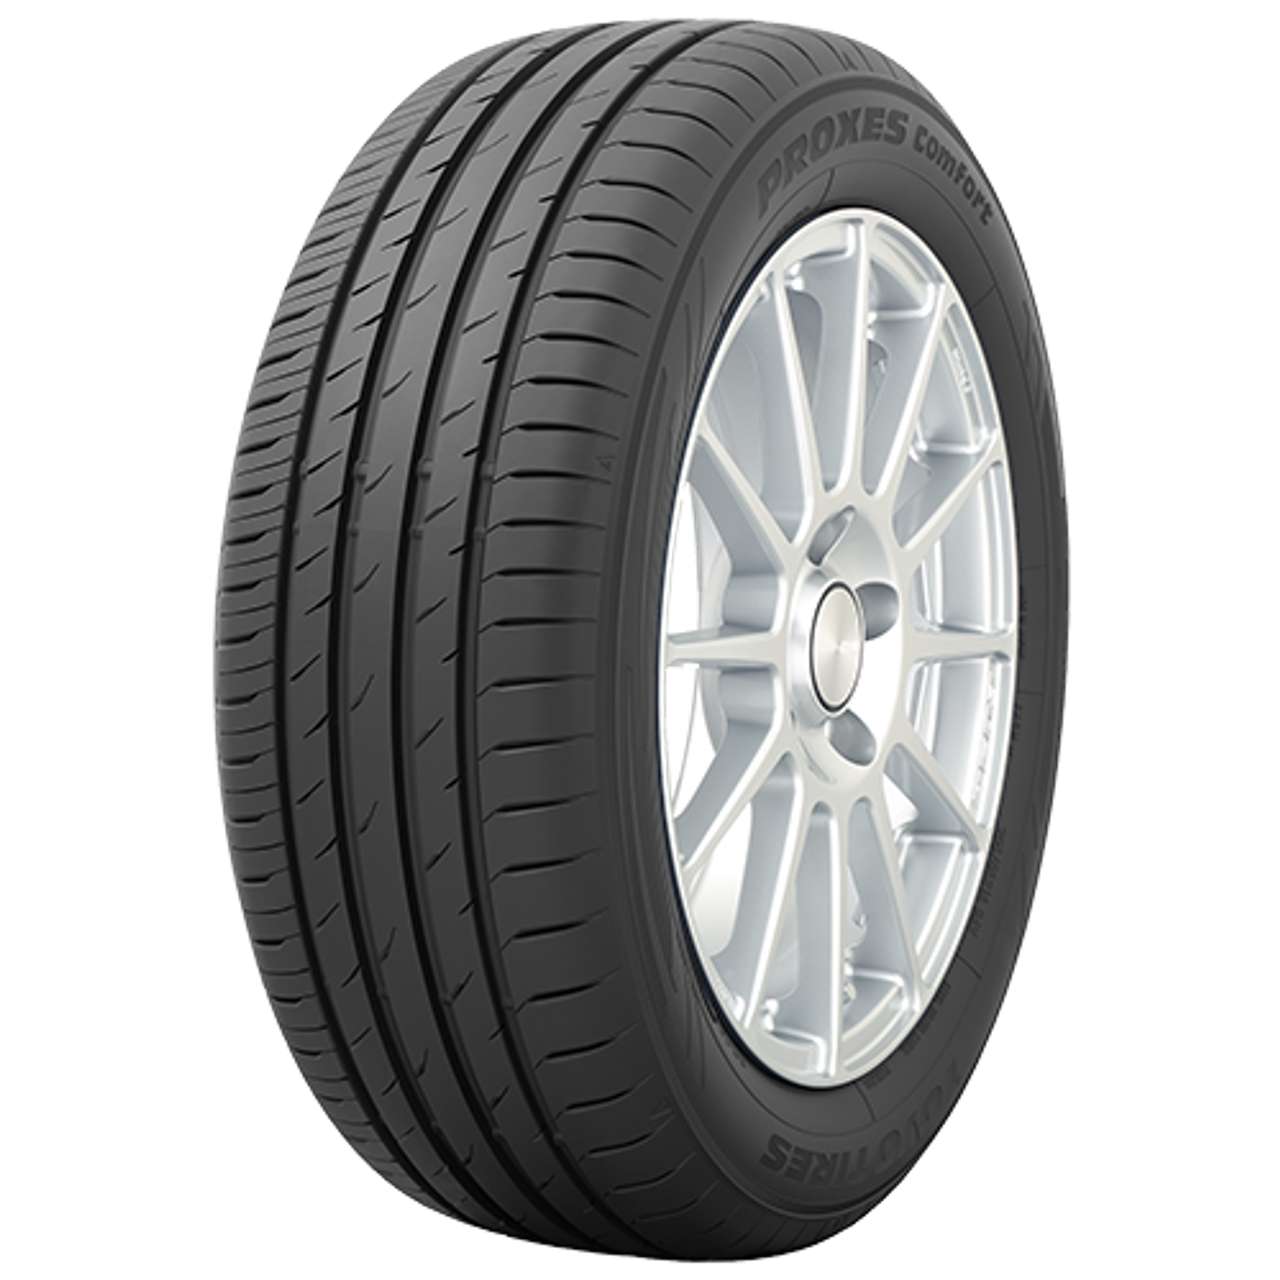 TOYO PROXES COMFORT 205/60R16 96V BSW XL